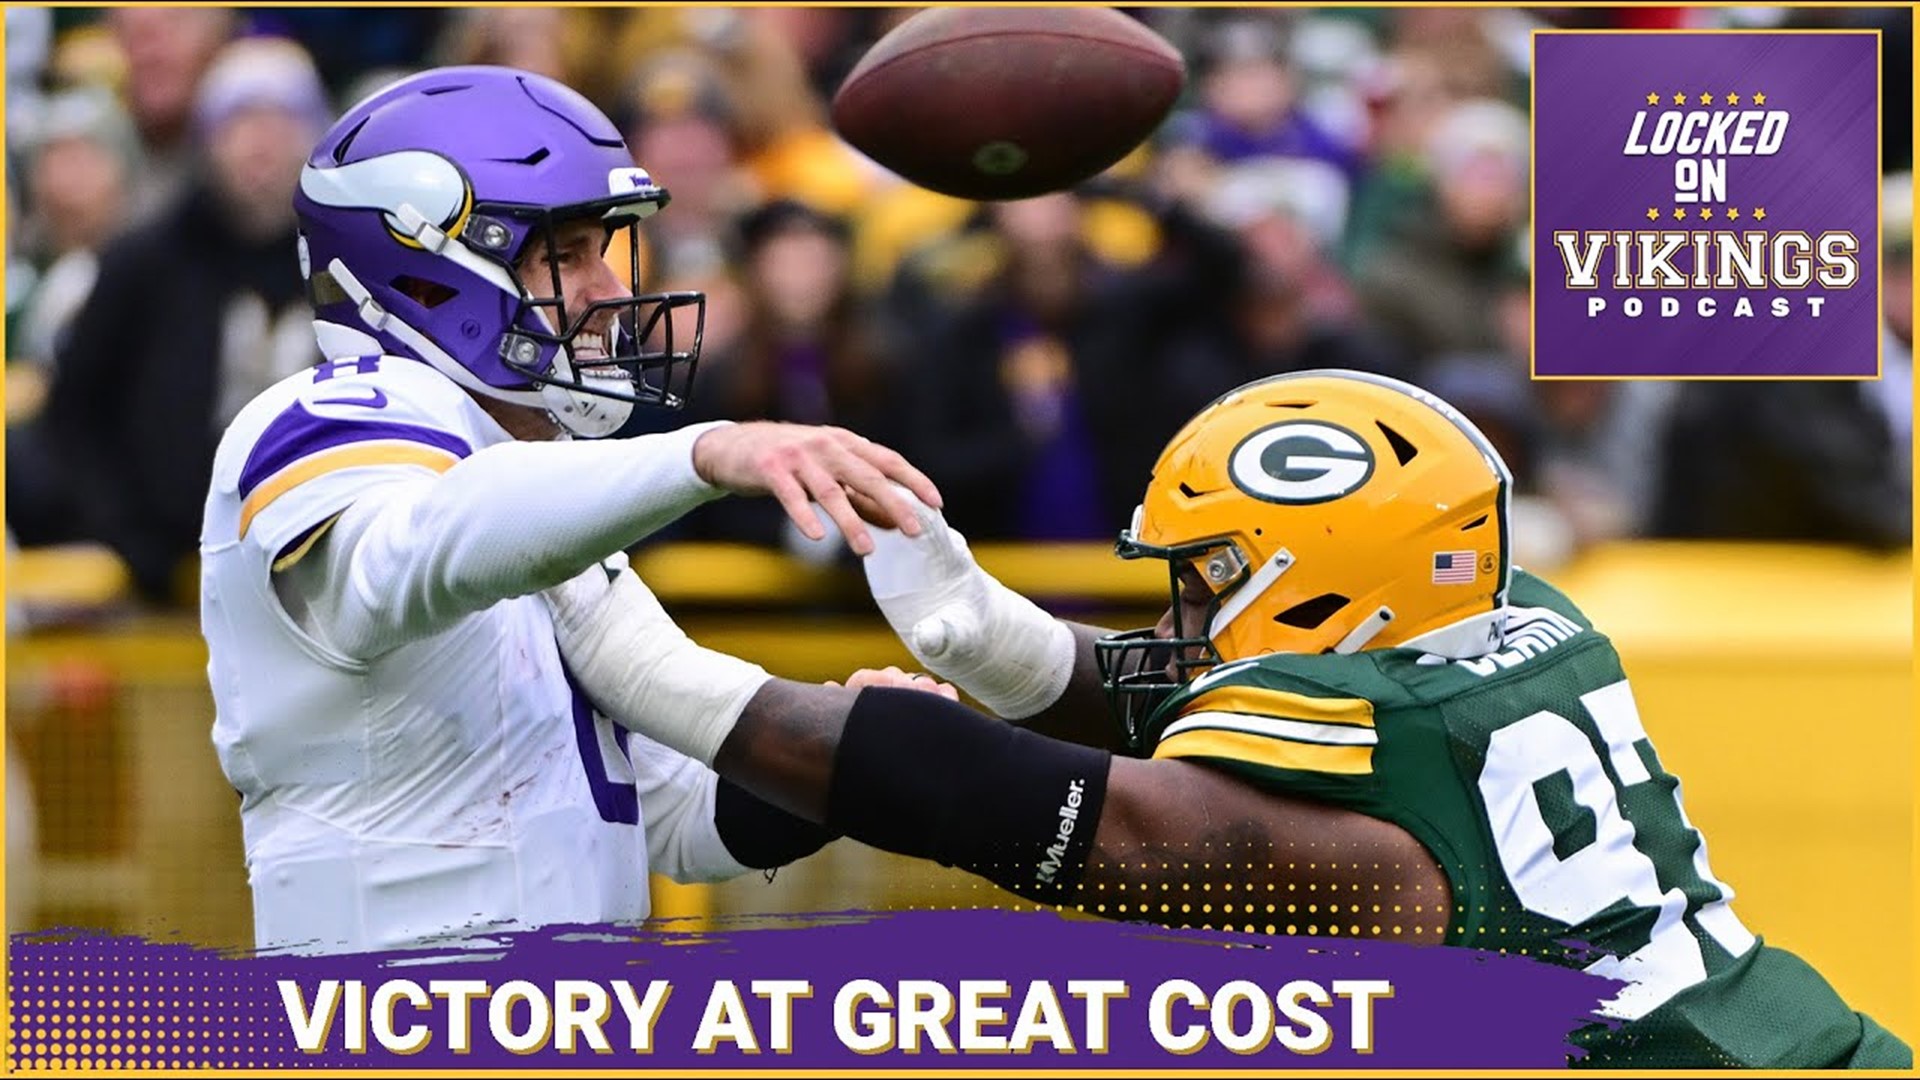 The Vikings are now without a quarterback, and despite winning 24-10 over Green Bay, the Vikings are reeling.